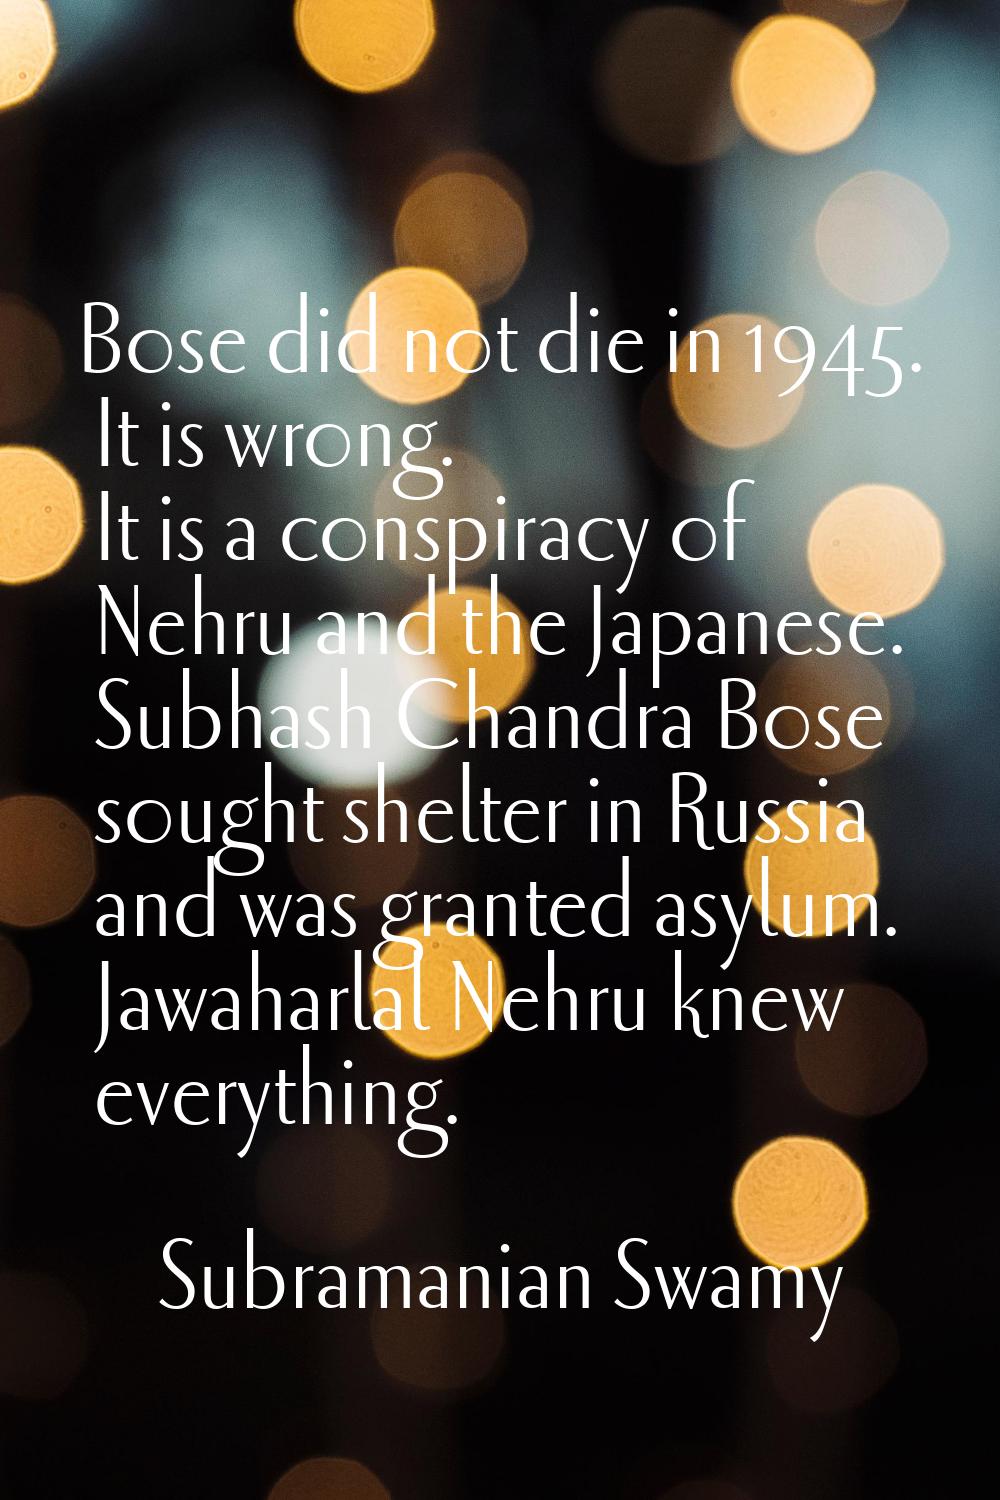 Bose did not die in 1945. It is wrong. It is a conspiracy of Nehru and the Japanese. Subhash Chandr